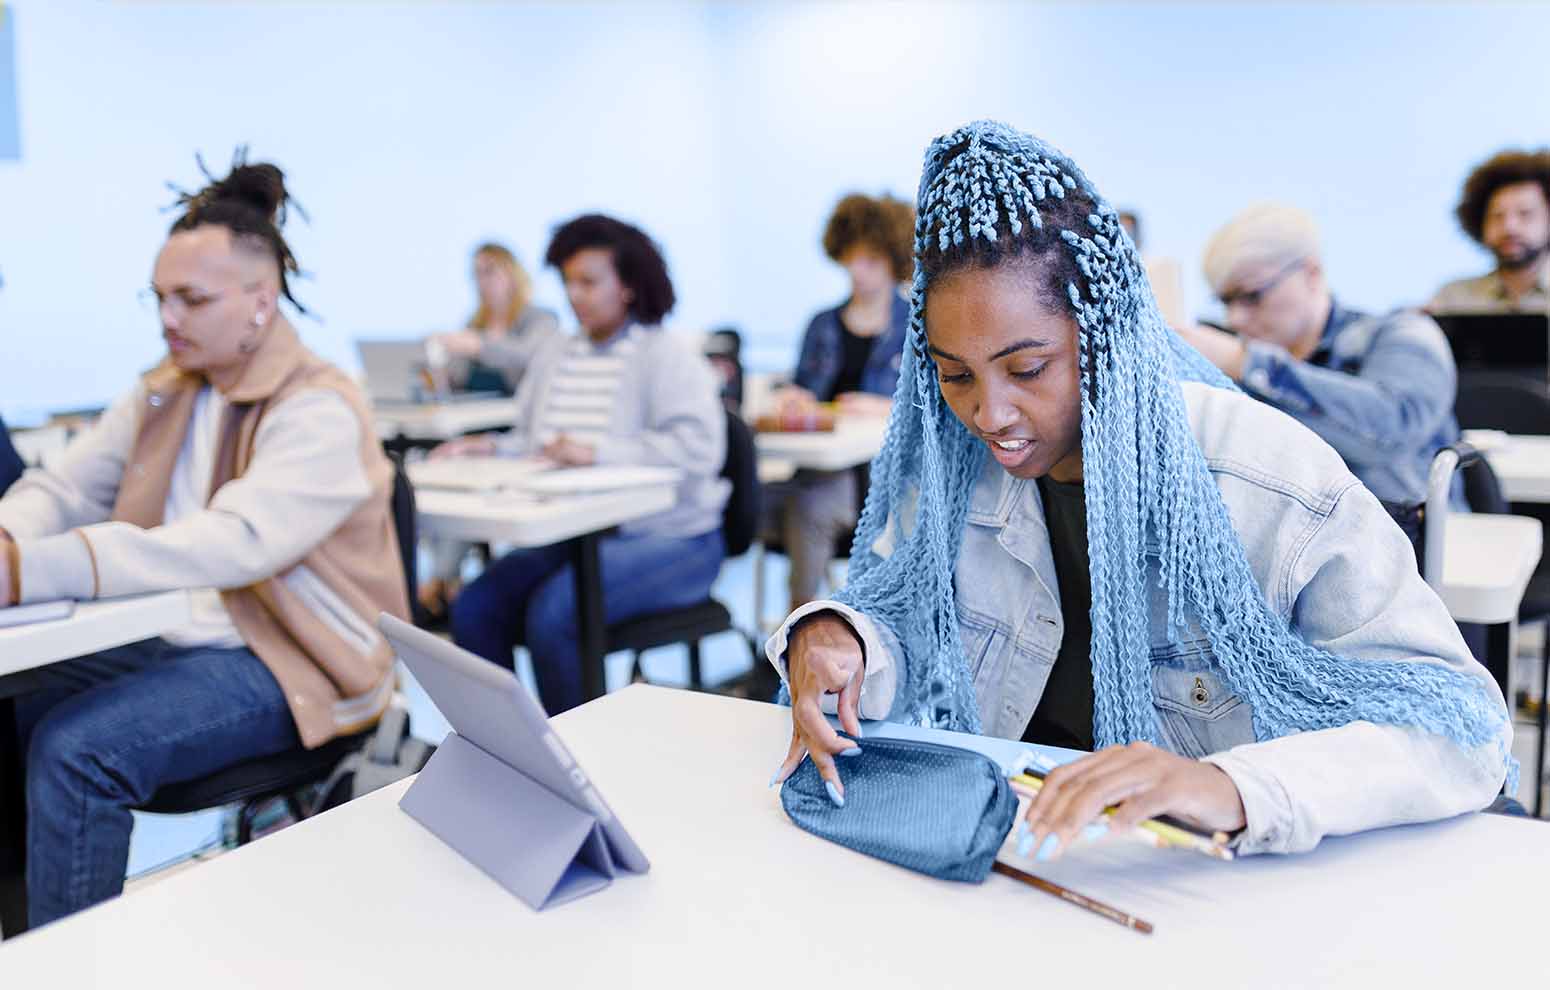 Girl with blue braids at classroom desk